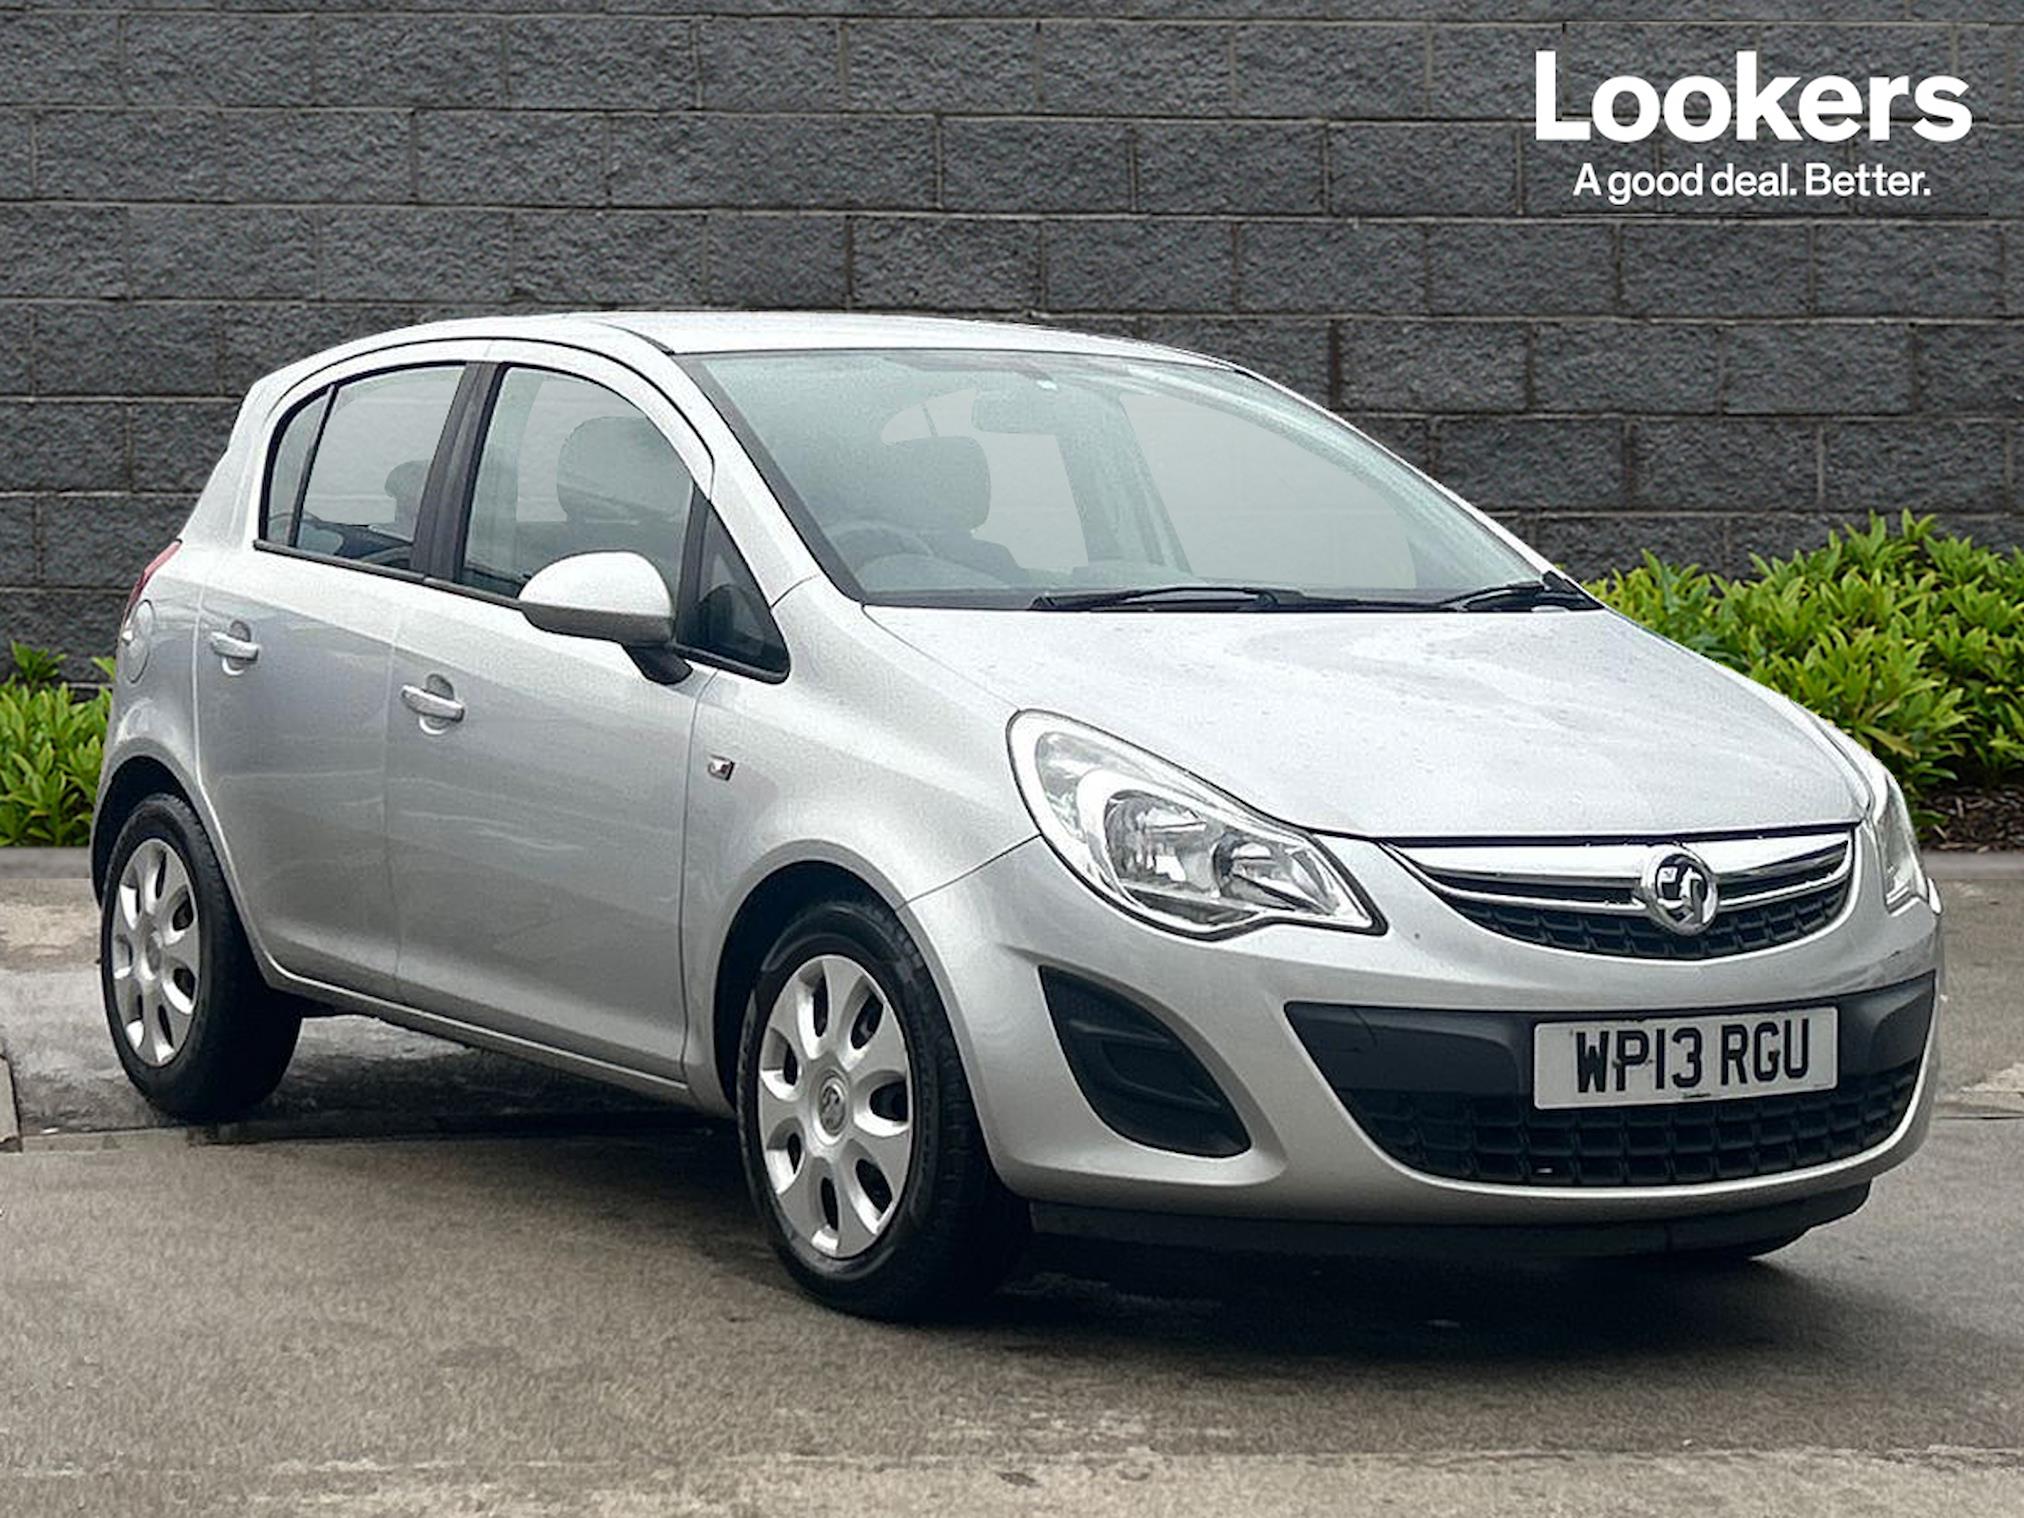 Used VAUXHALL CORSA 1.2 Exclusiv 5Dr [Ac] 2013